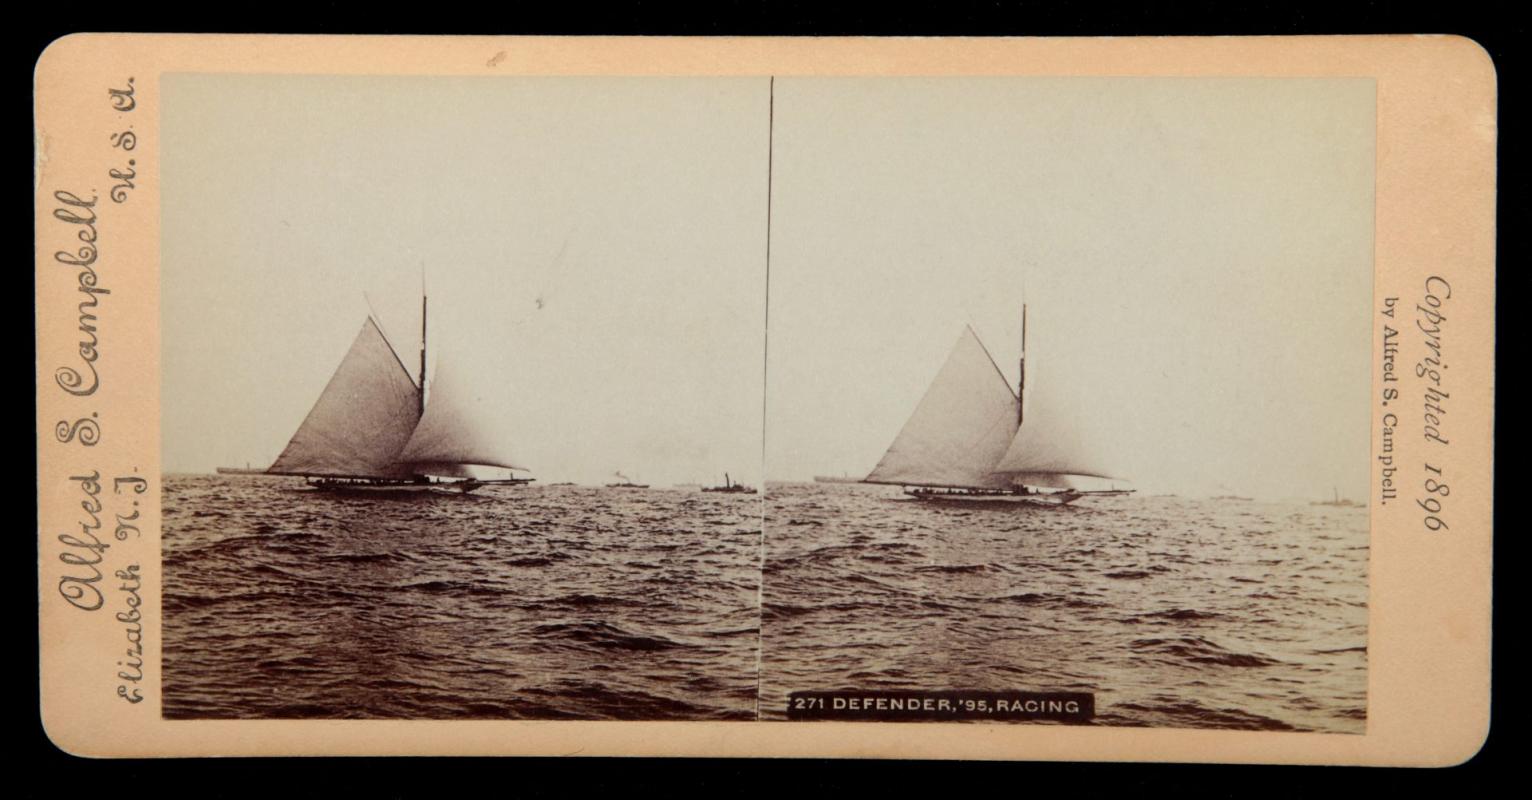 A STEREOVIEW OF AMERICA'S CUP WINNER DEFENDER